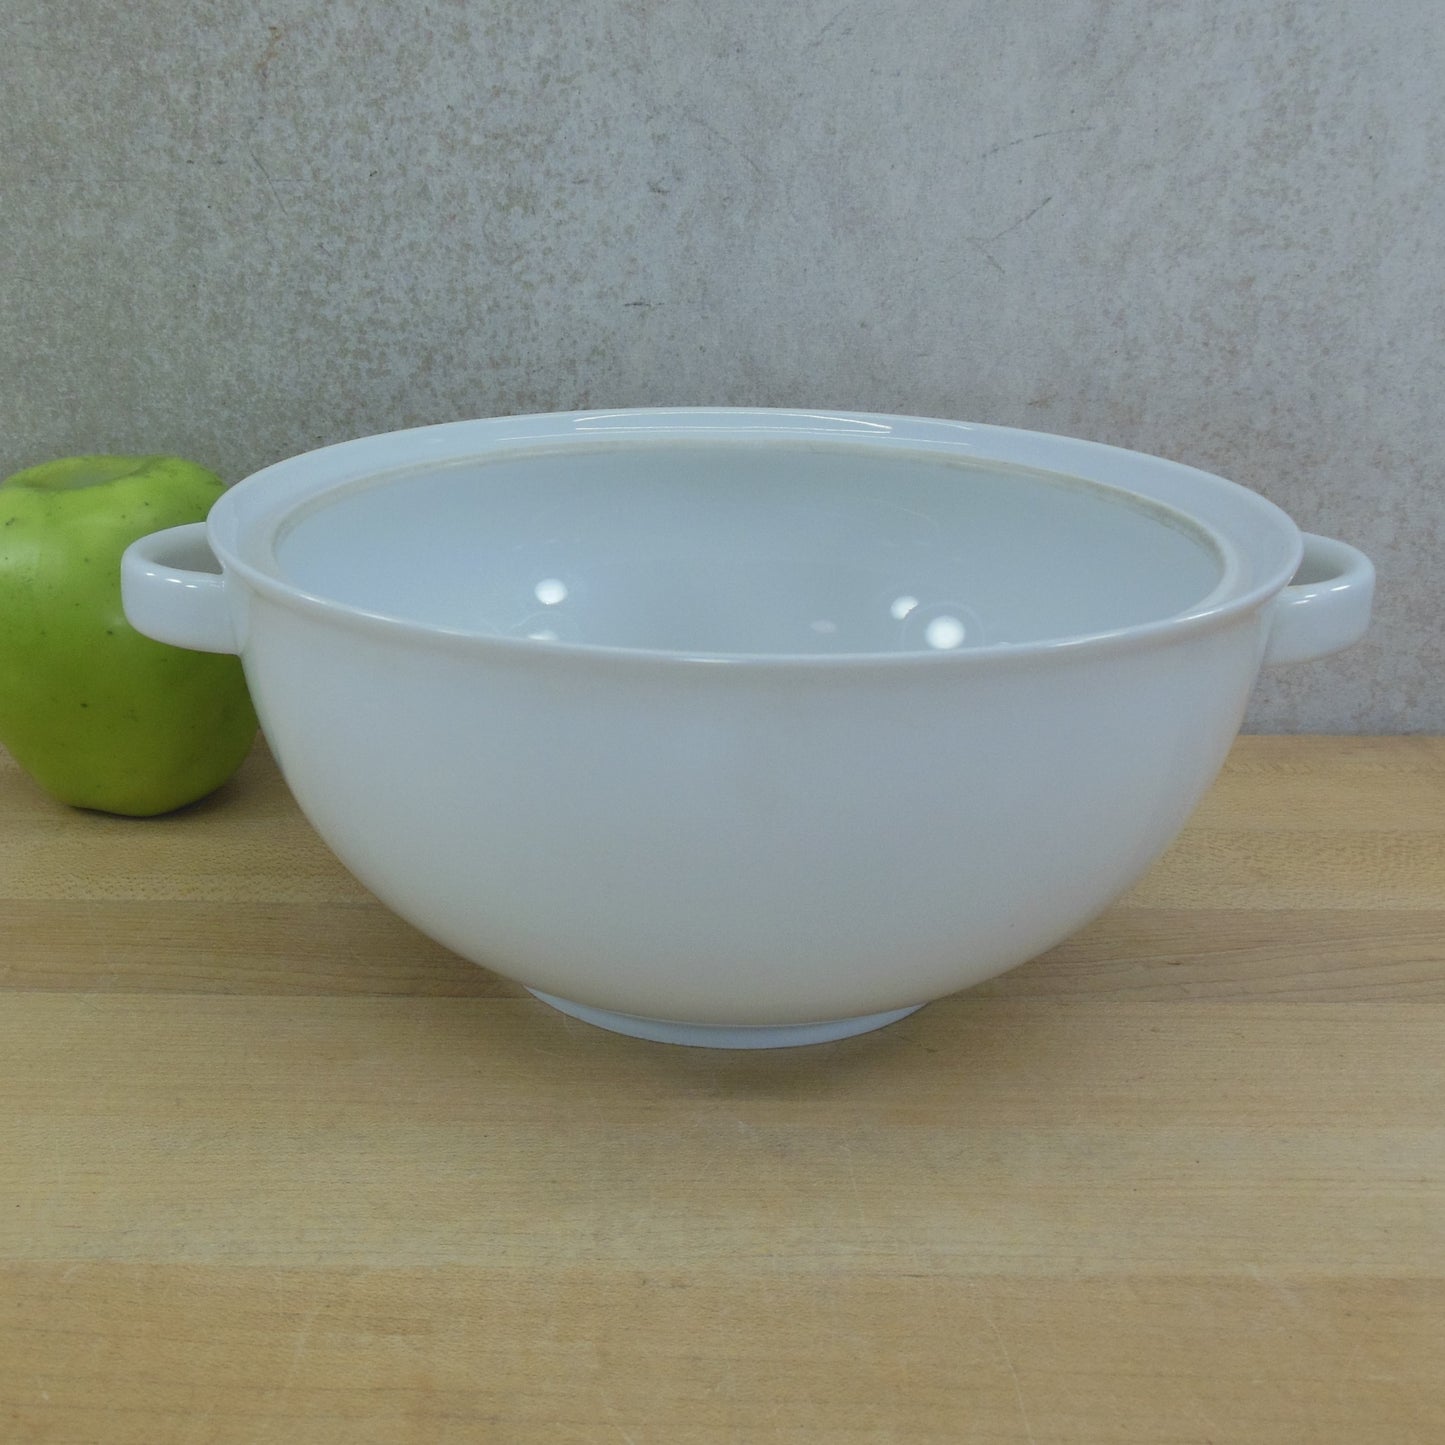 Arzberg Germany Hobby White Round Covered Casserole Vegetable Bowl - No Lid